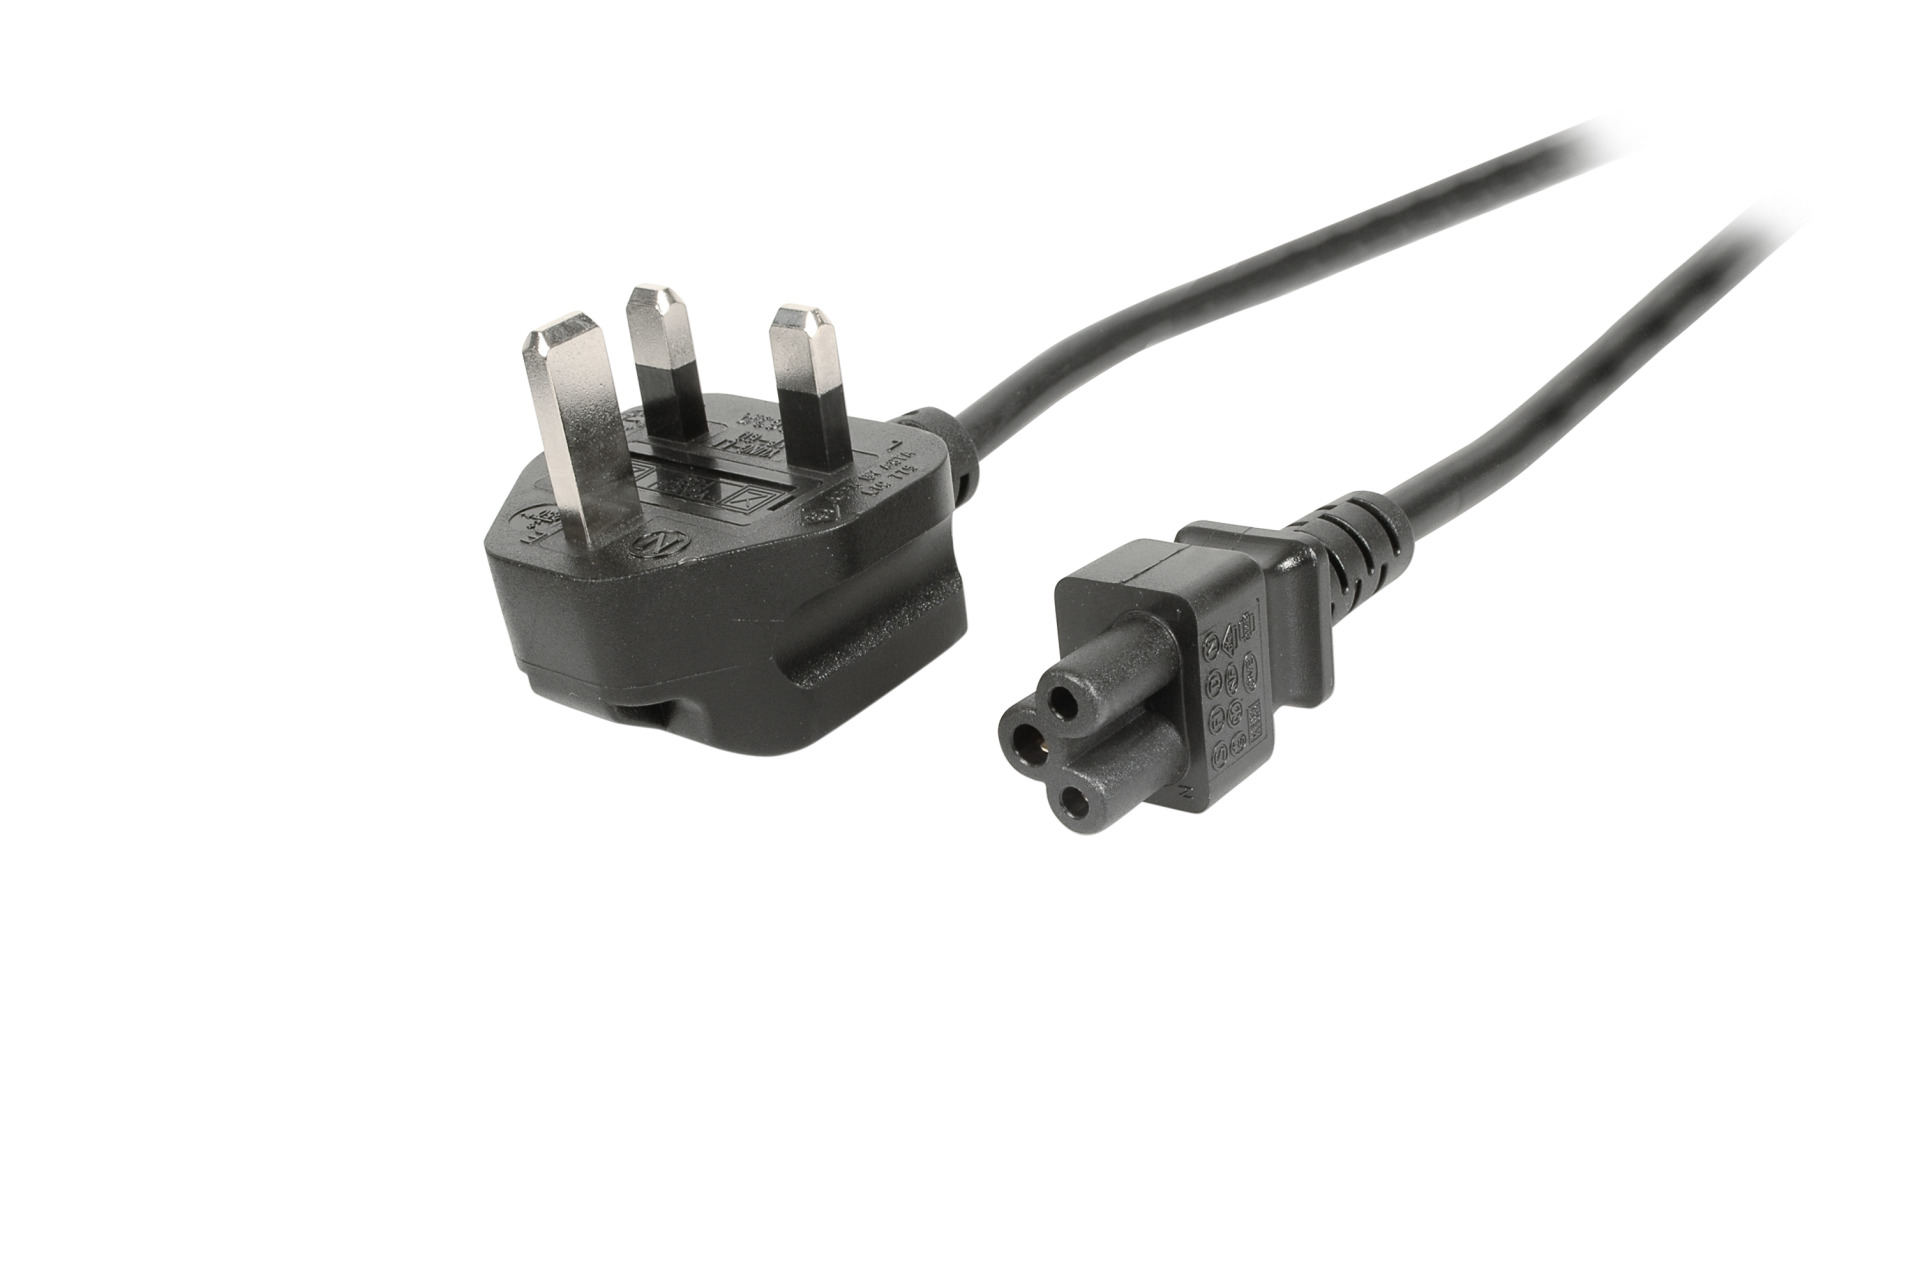 IEC Pedalboard Power Cord #1 - Durable and Stunning